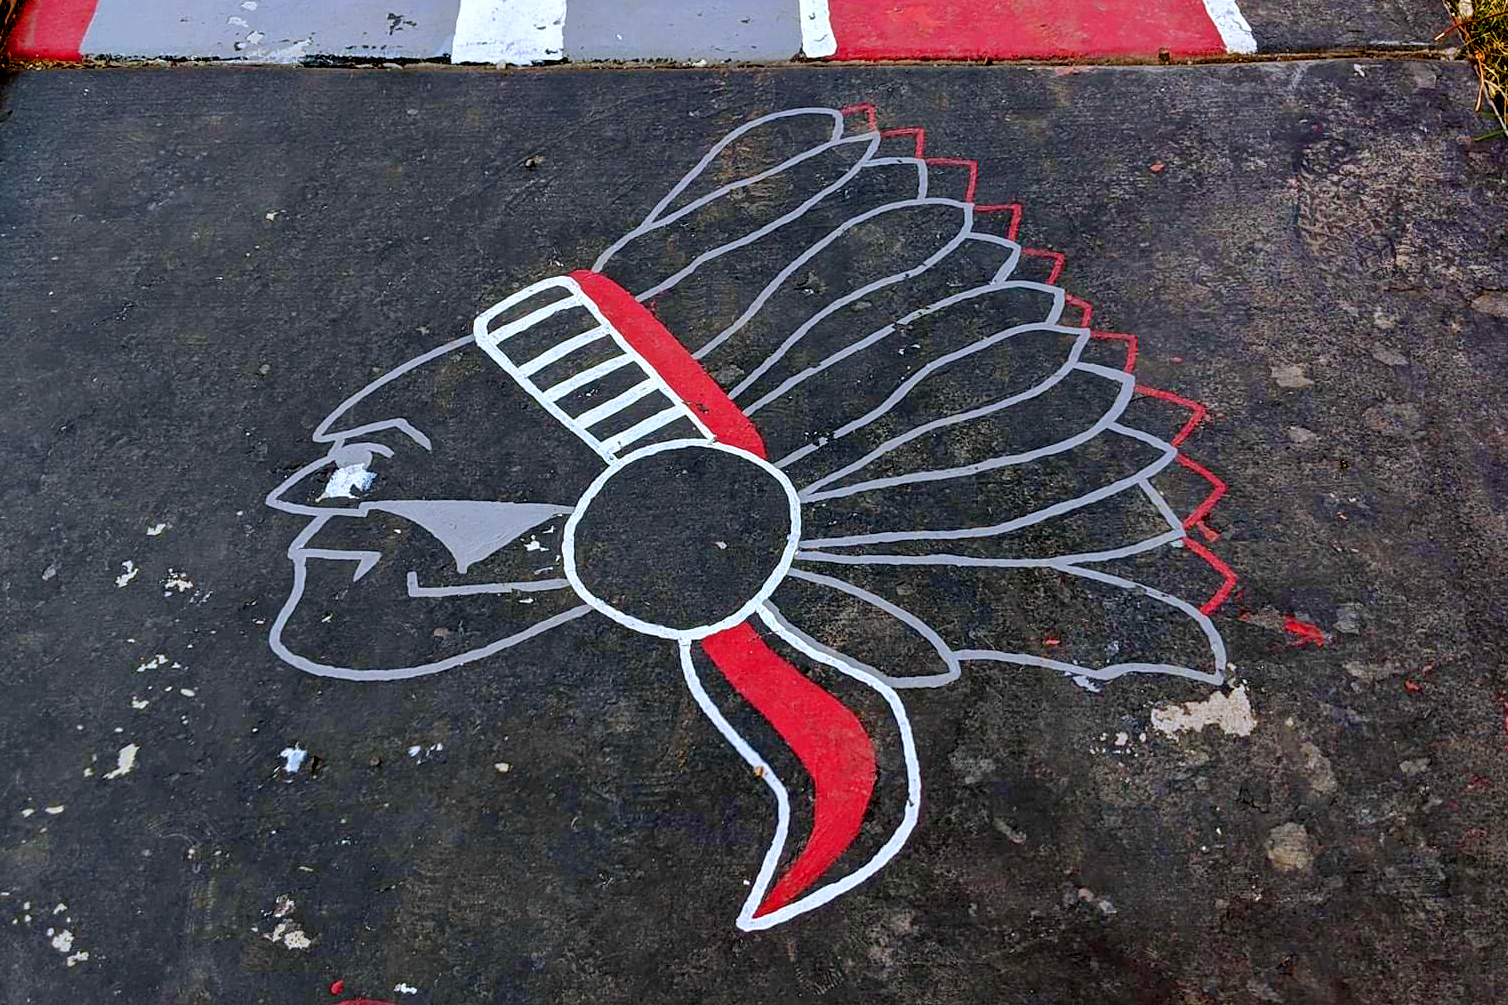 Petition · Remove Racist Mascots from Sweetwater Union High School District  ·